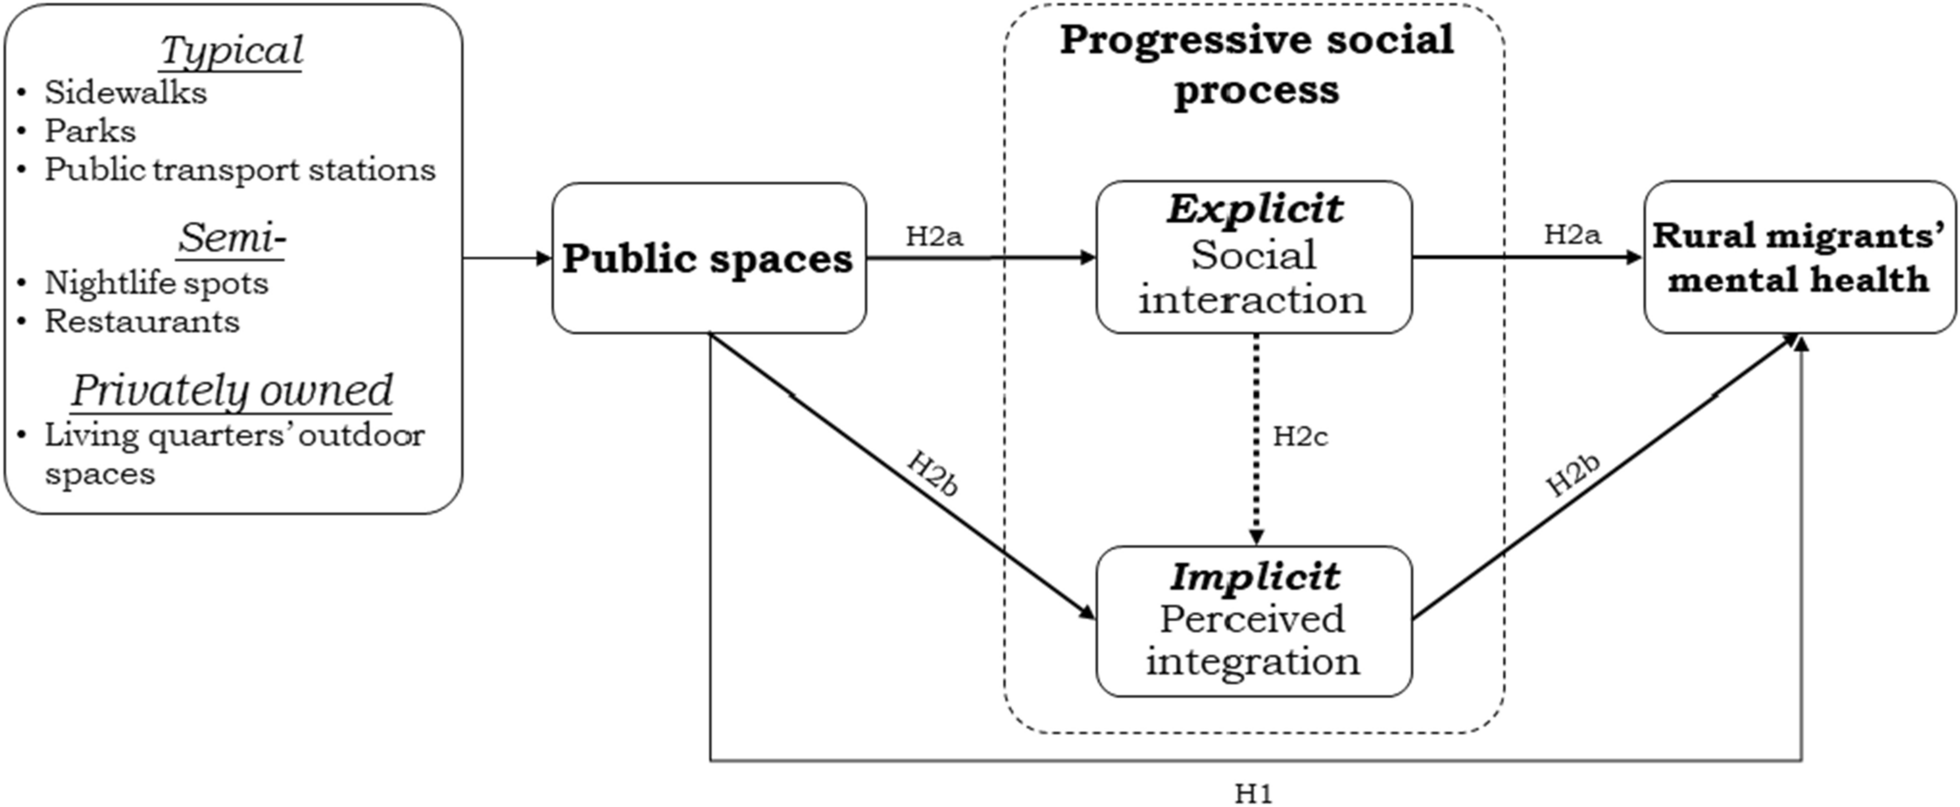 Revisiting the impact of public spaces on the mental health of rural migrants in Wuhan: an integrated multi-source data analysis